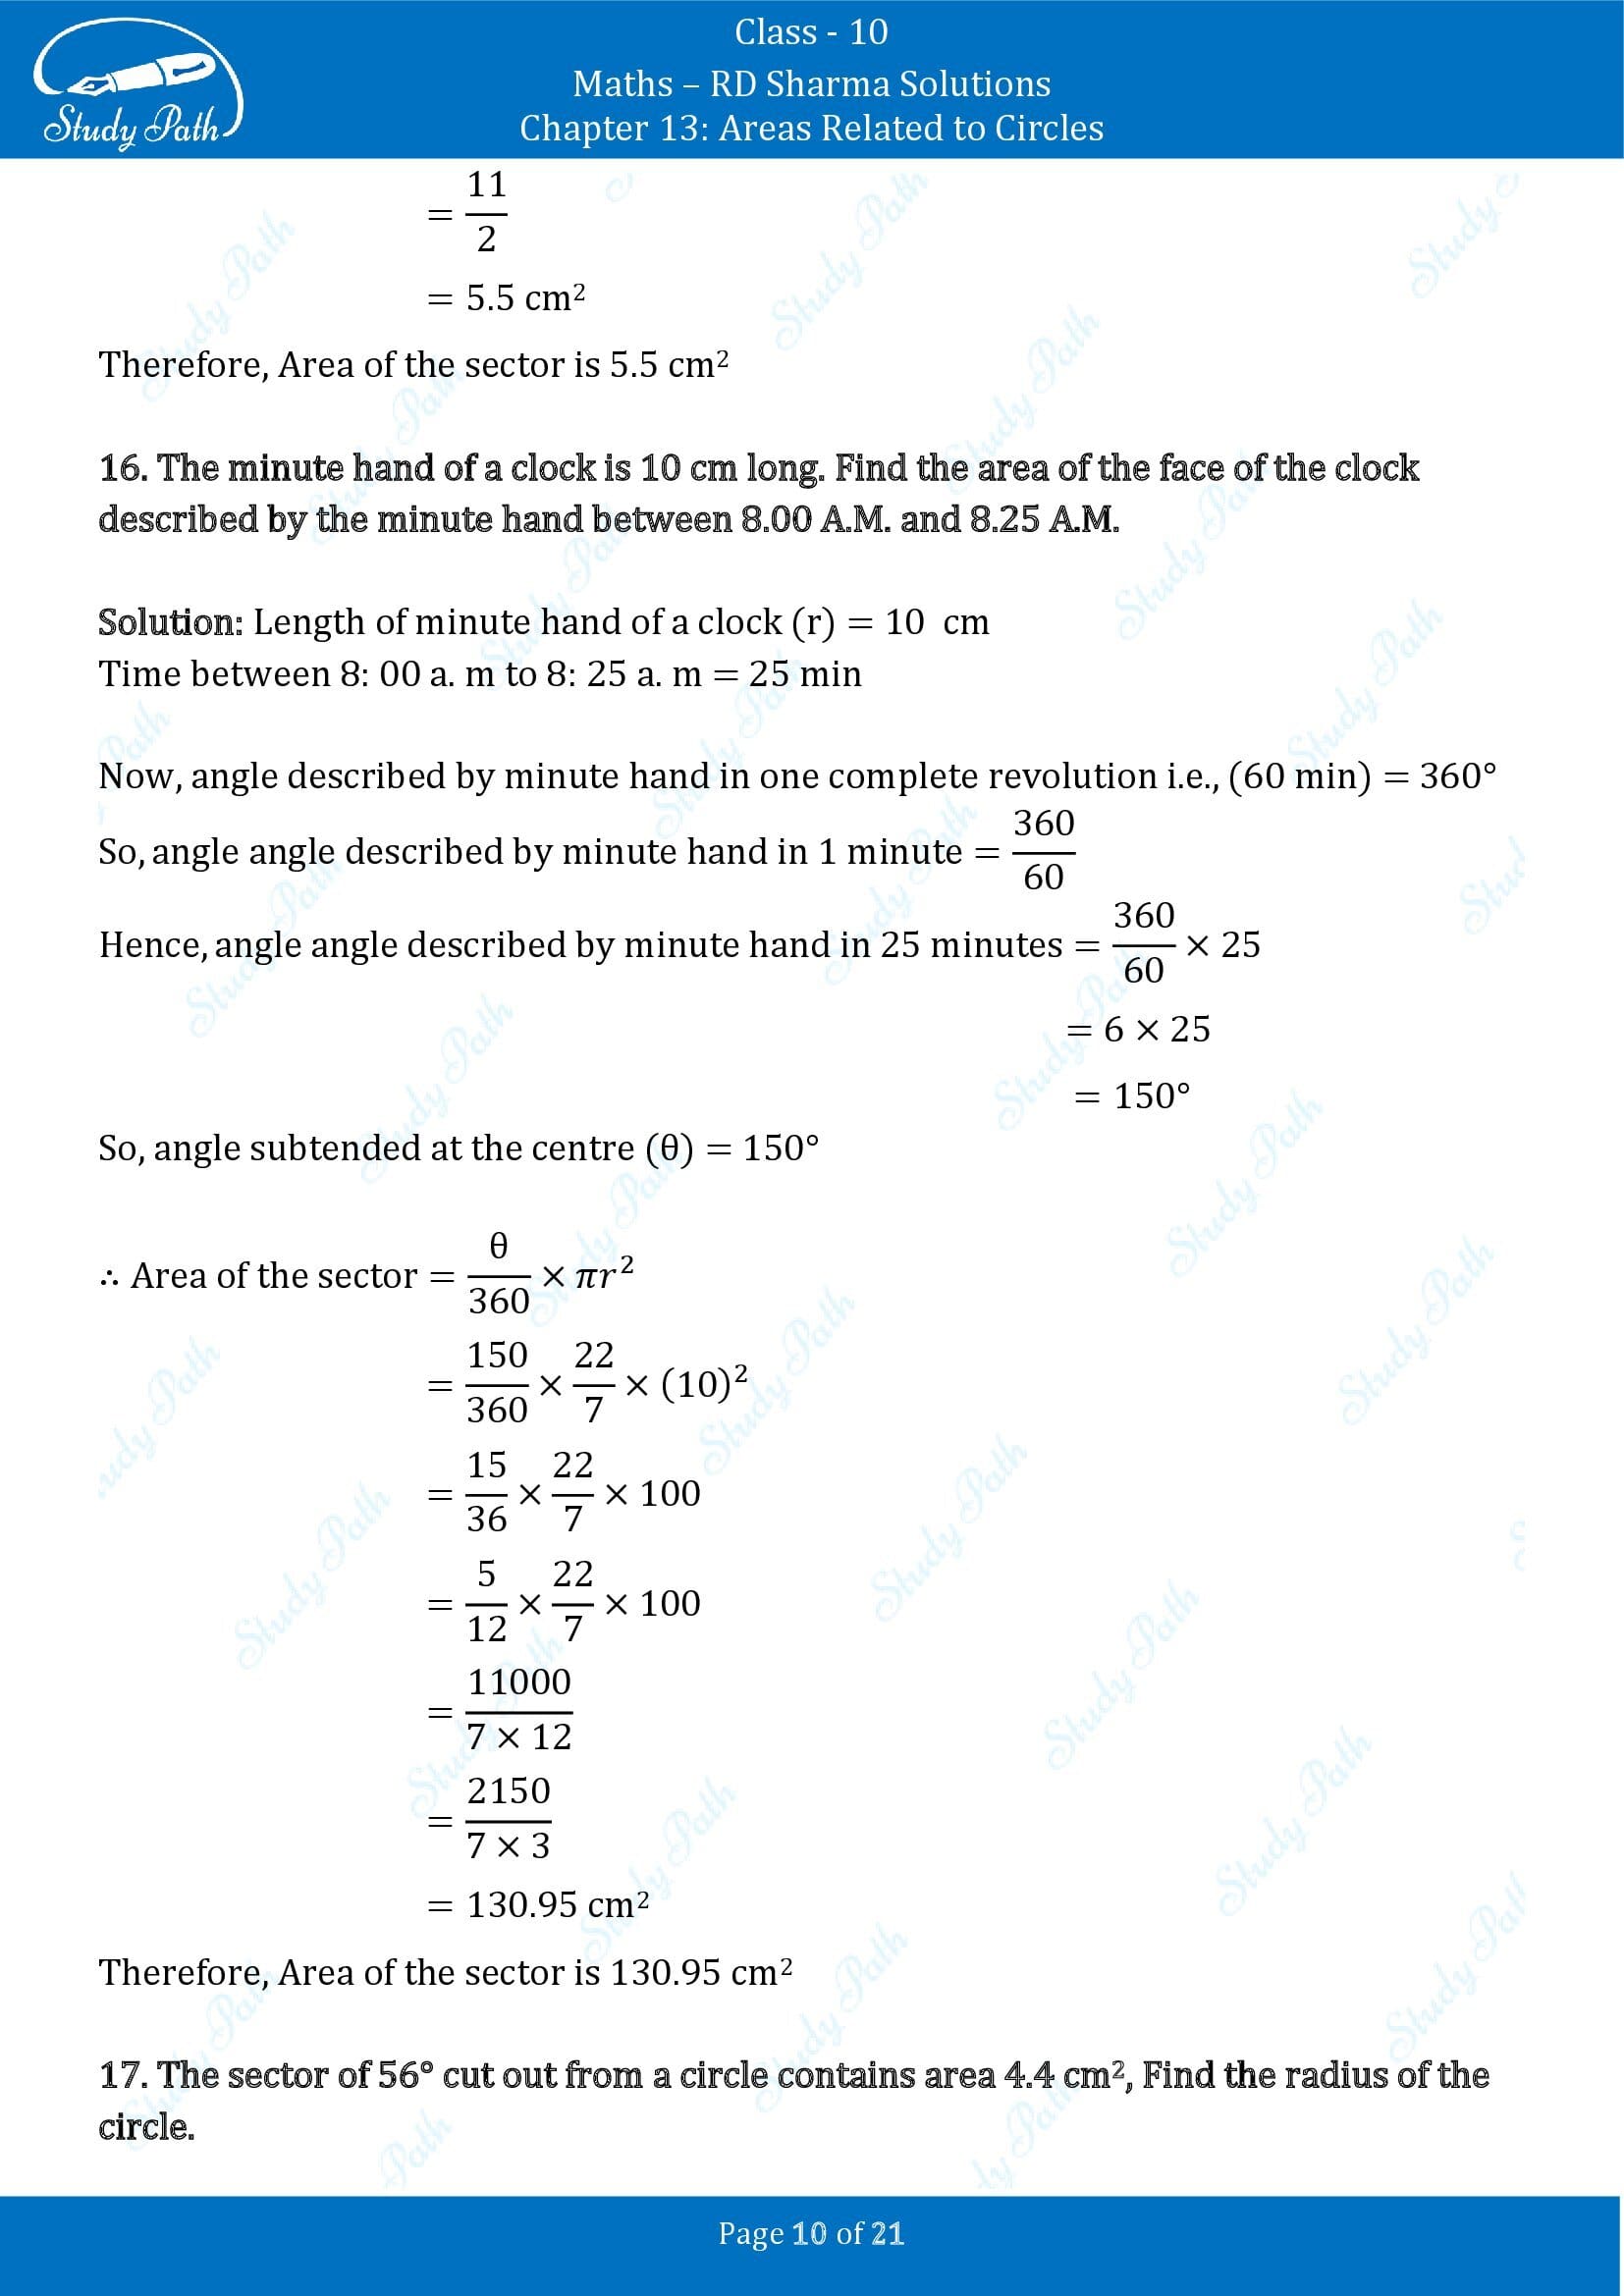 RD Sharma Solutions Class 10 Chapter 13 Areas Related to Circles Exercise 13.2 00010